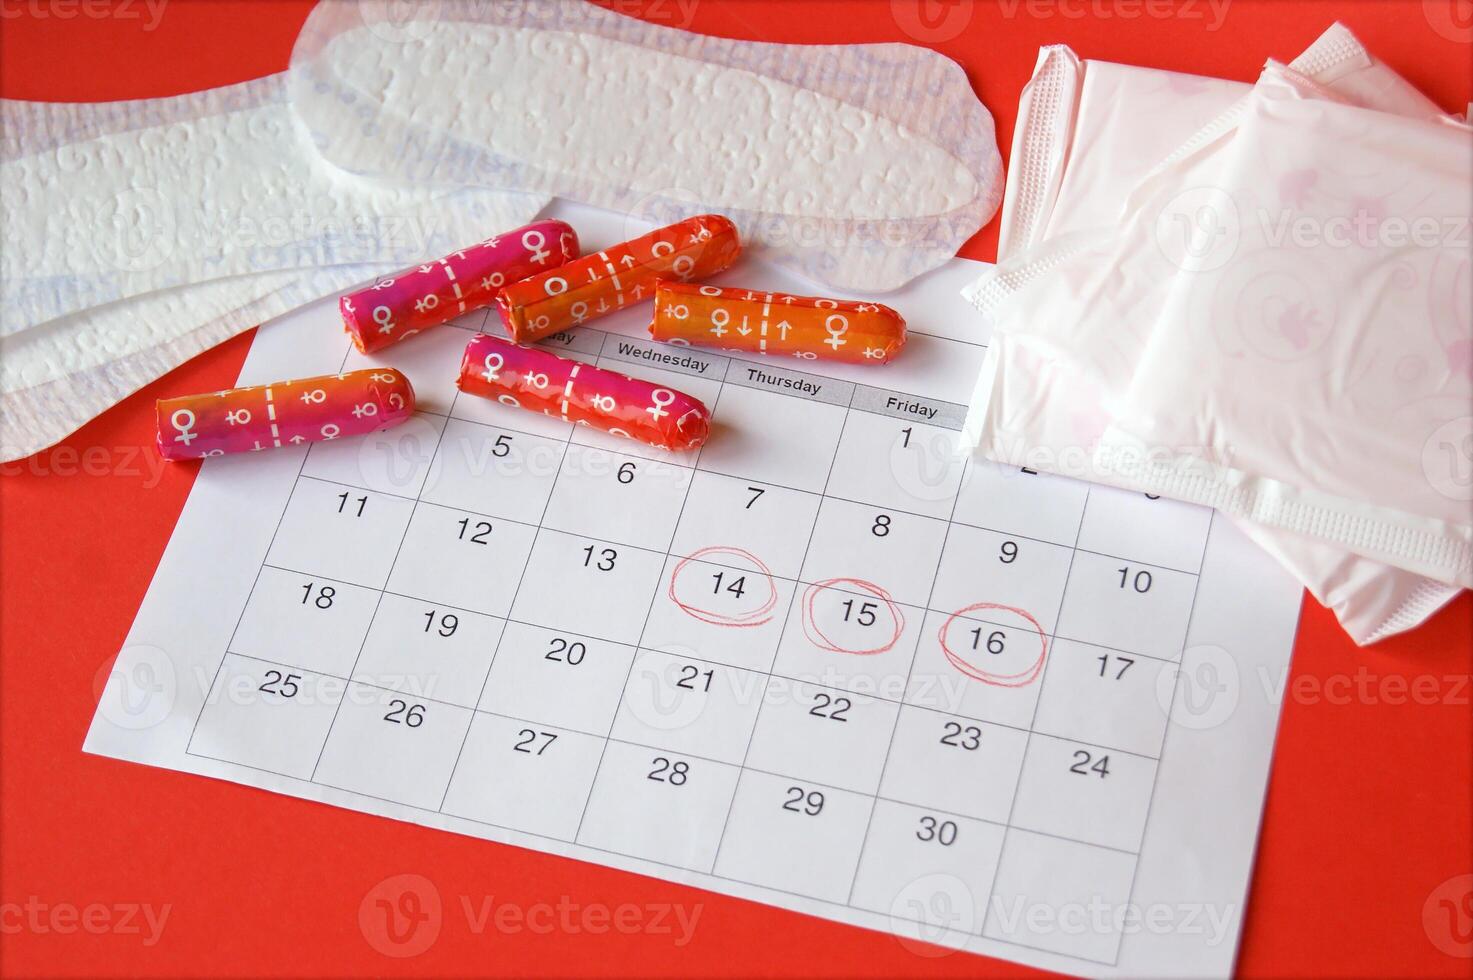 Menstrual pads and tampons on menstruation period calendar with on red background. photo